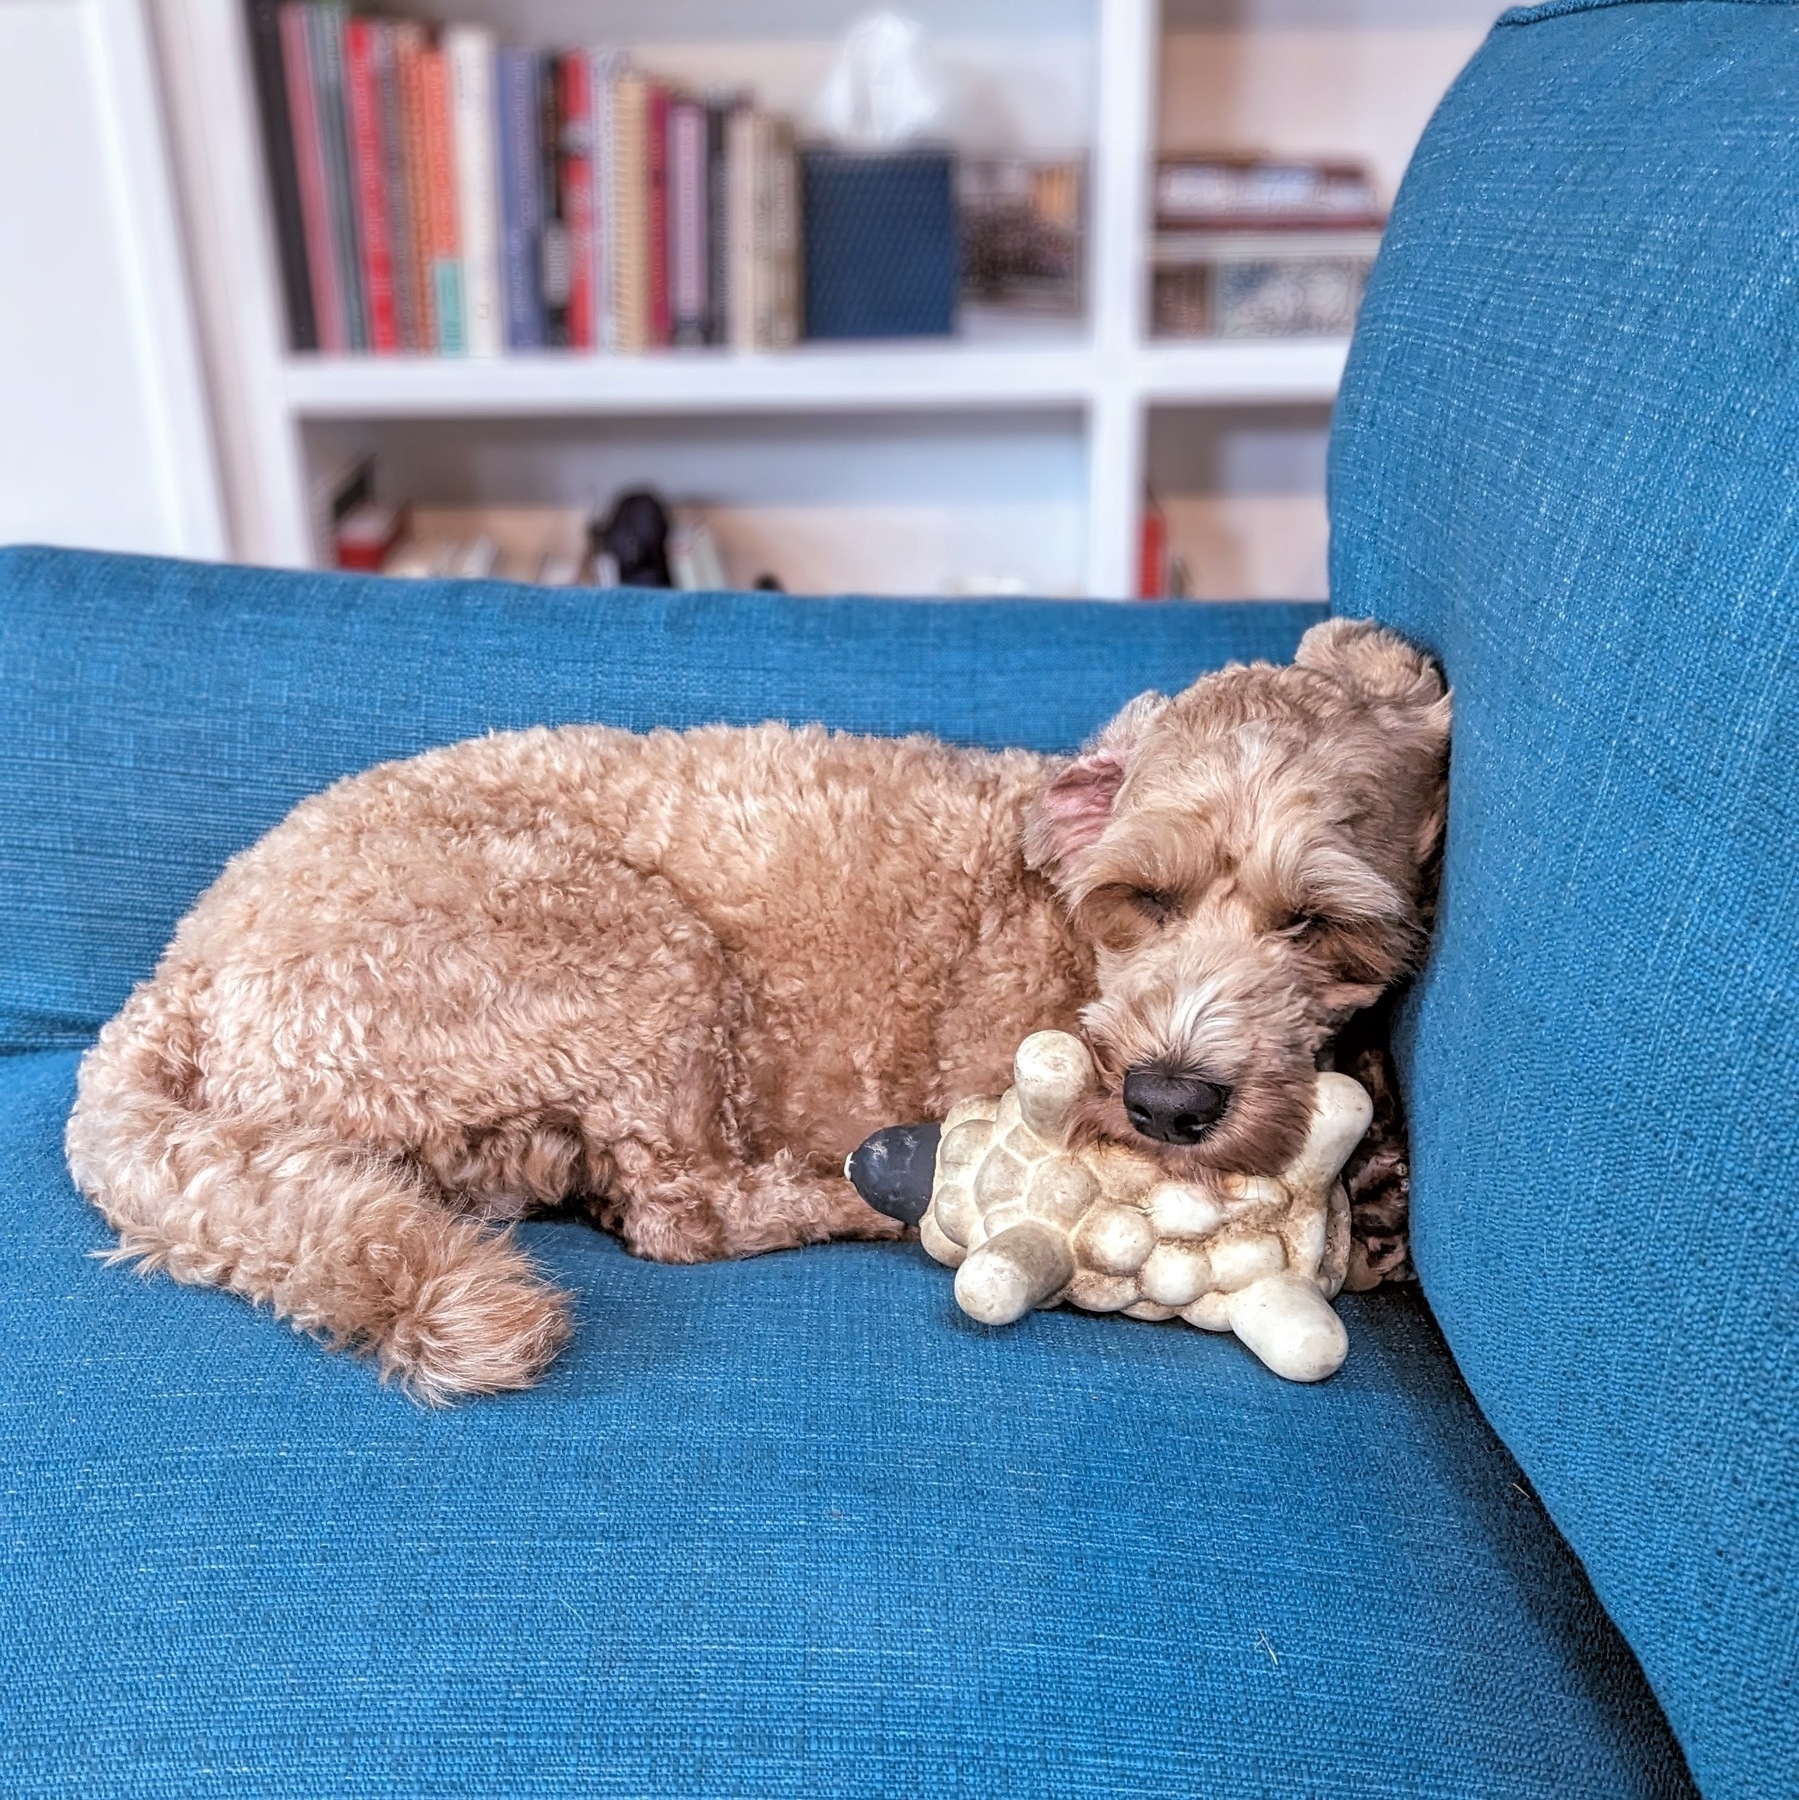 Sleeping mini goldendoodle dog on a blue couch with a toy lamb in its mouth